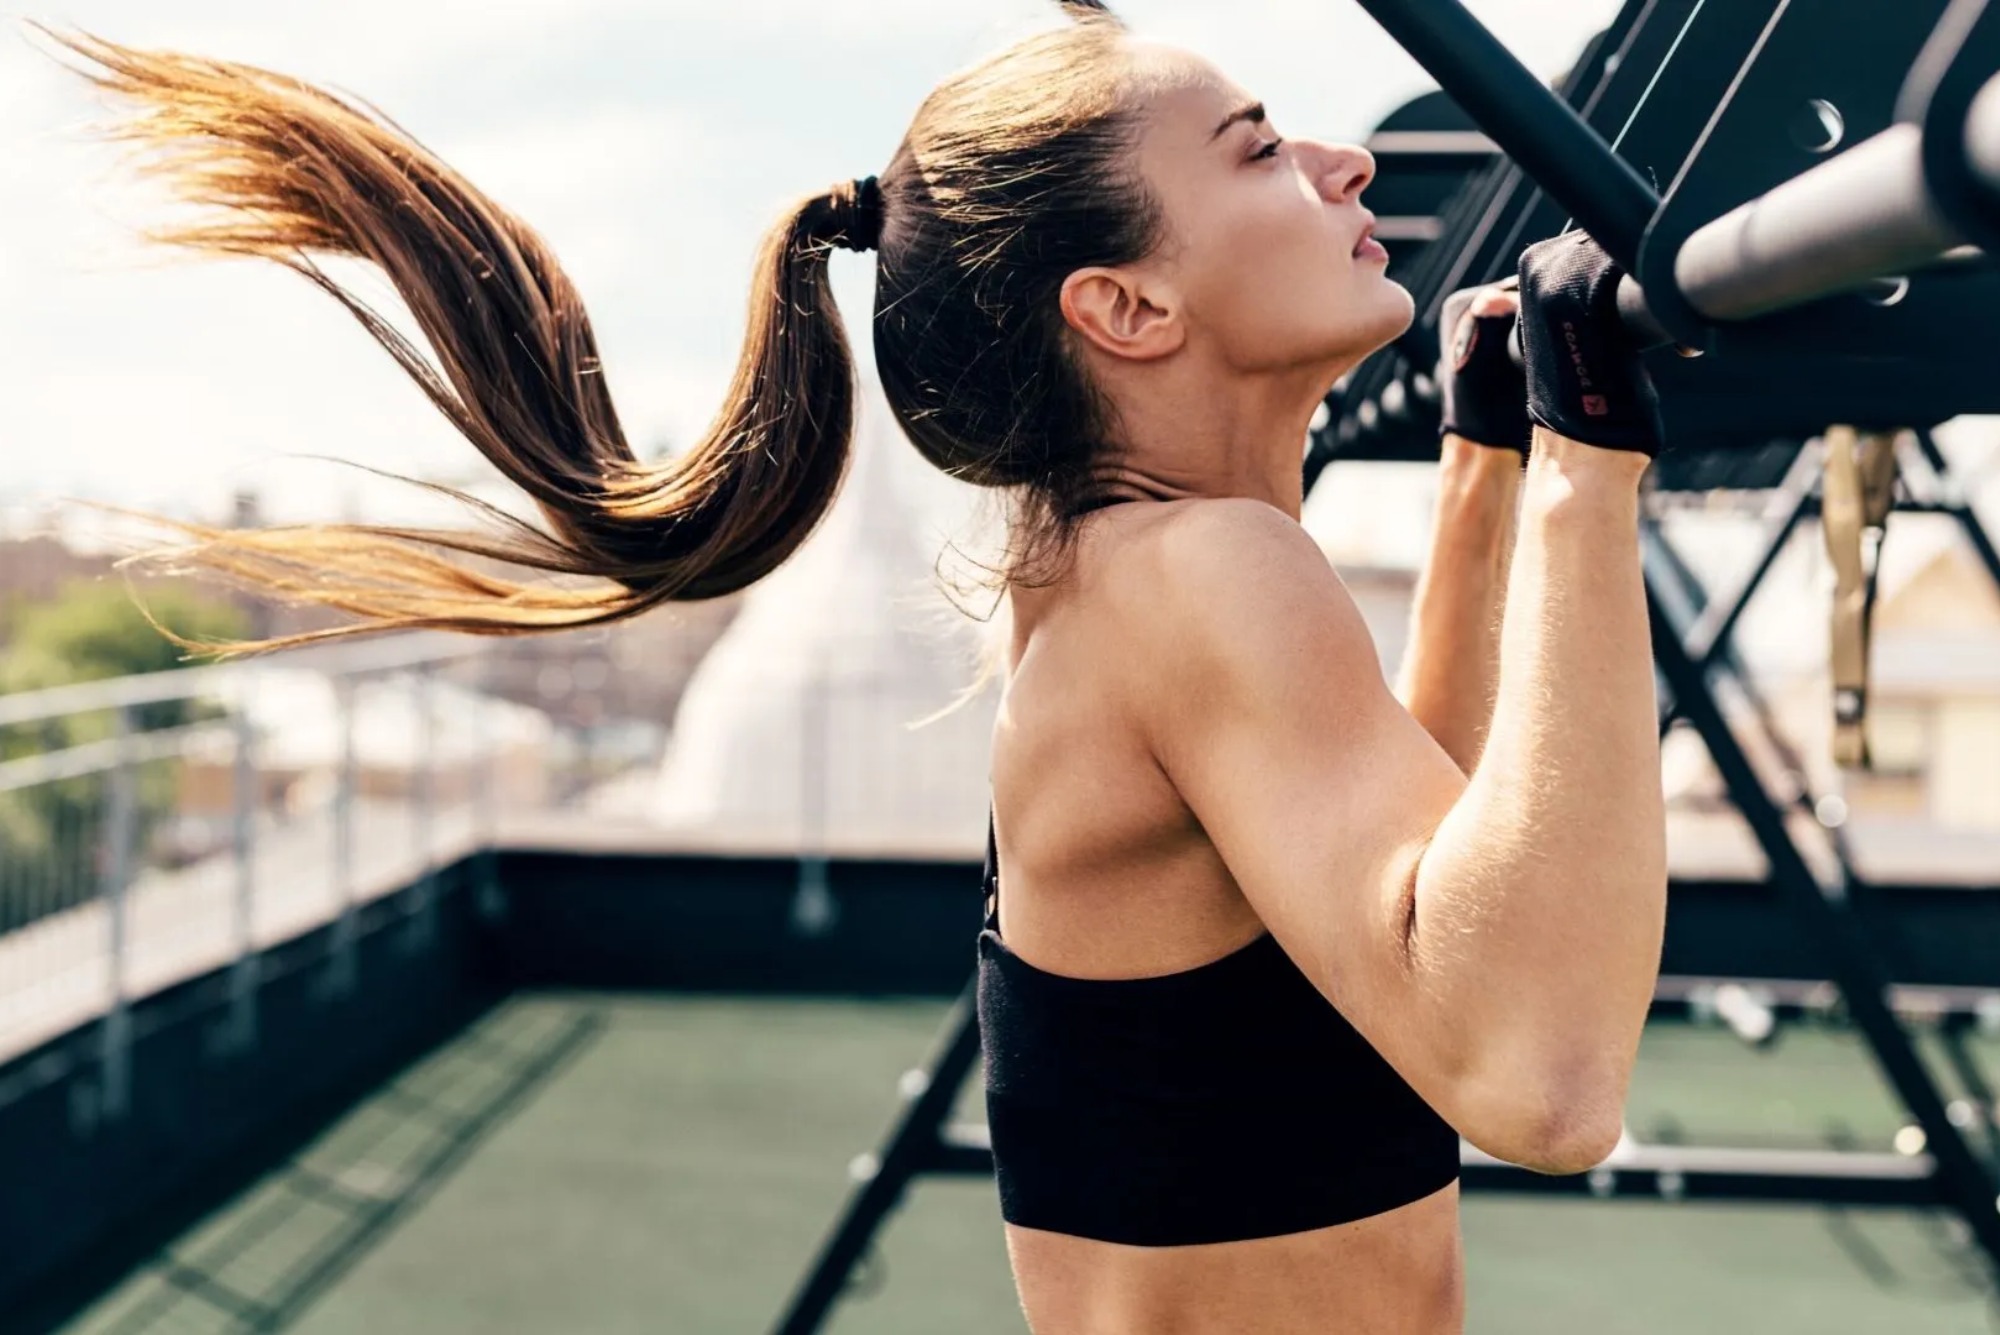 How to Get Rid of Back Fat at the Gym